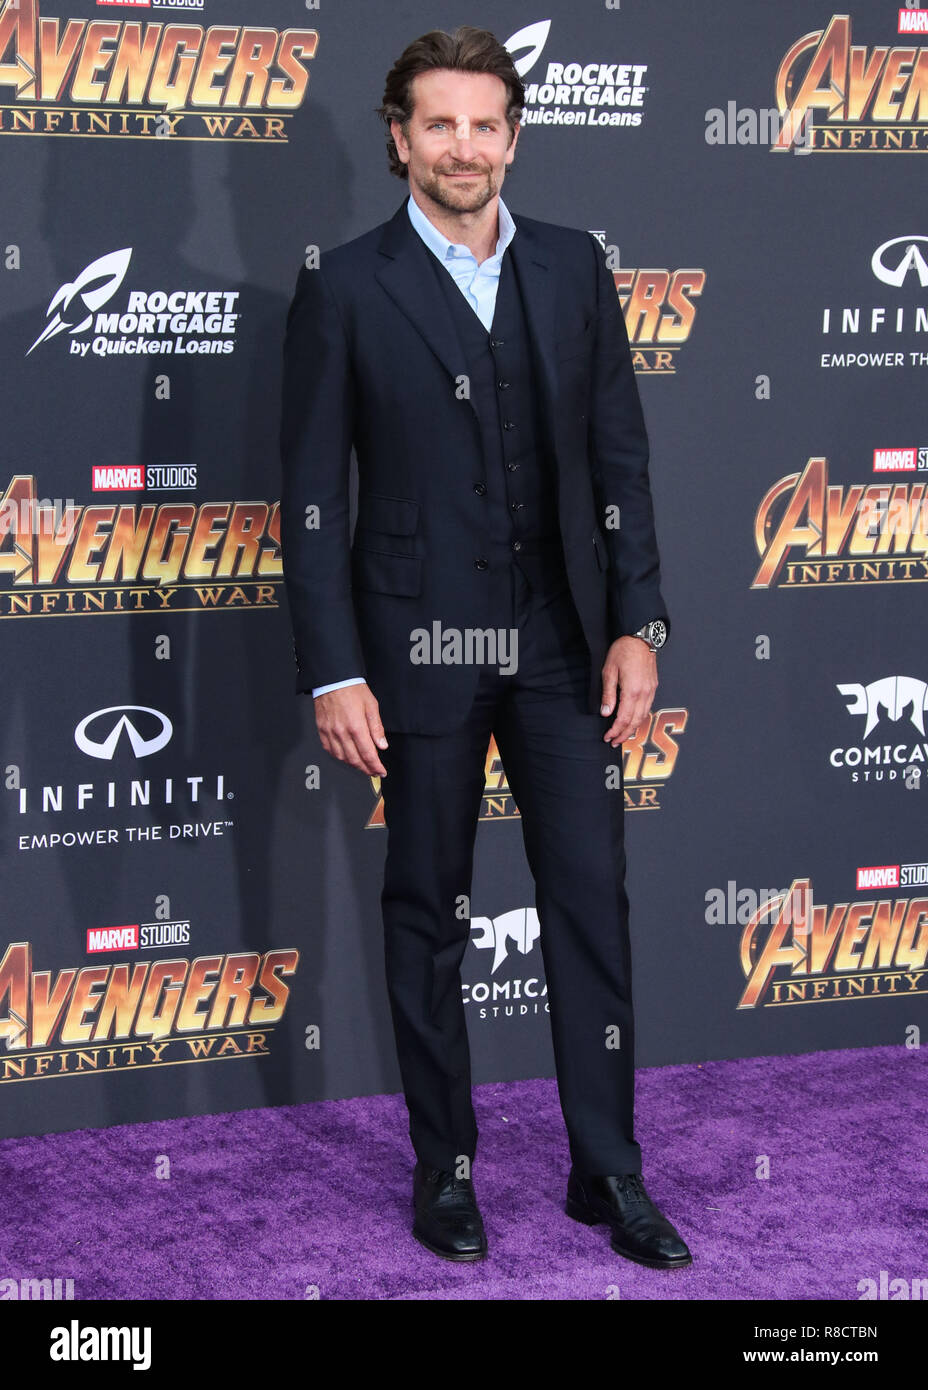 HOLLYWOOD, LOS ANGELES, CA, USA - APRIL 23: Bradley Cooper at the World Premiere Of Disney And Marvel's 'Avengers: Infinity War' held at the El Capitan Theatre, Dolby Theatre and TCL Chinese Theatre IMAX on April 23, 2018 in Hollywood, Los Angeles, California, United States. (Photo by Xavier Collin/Image Press Agency) Stock Photo